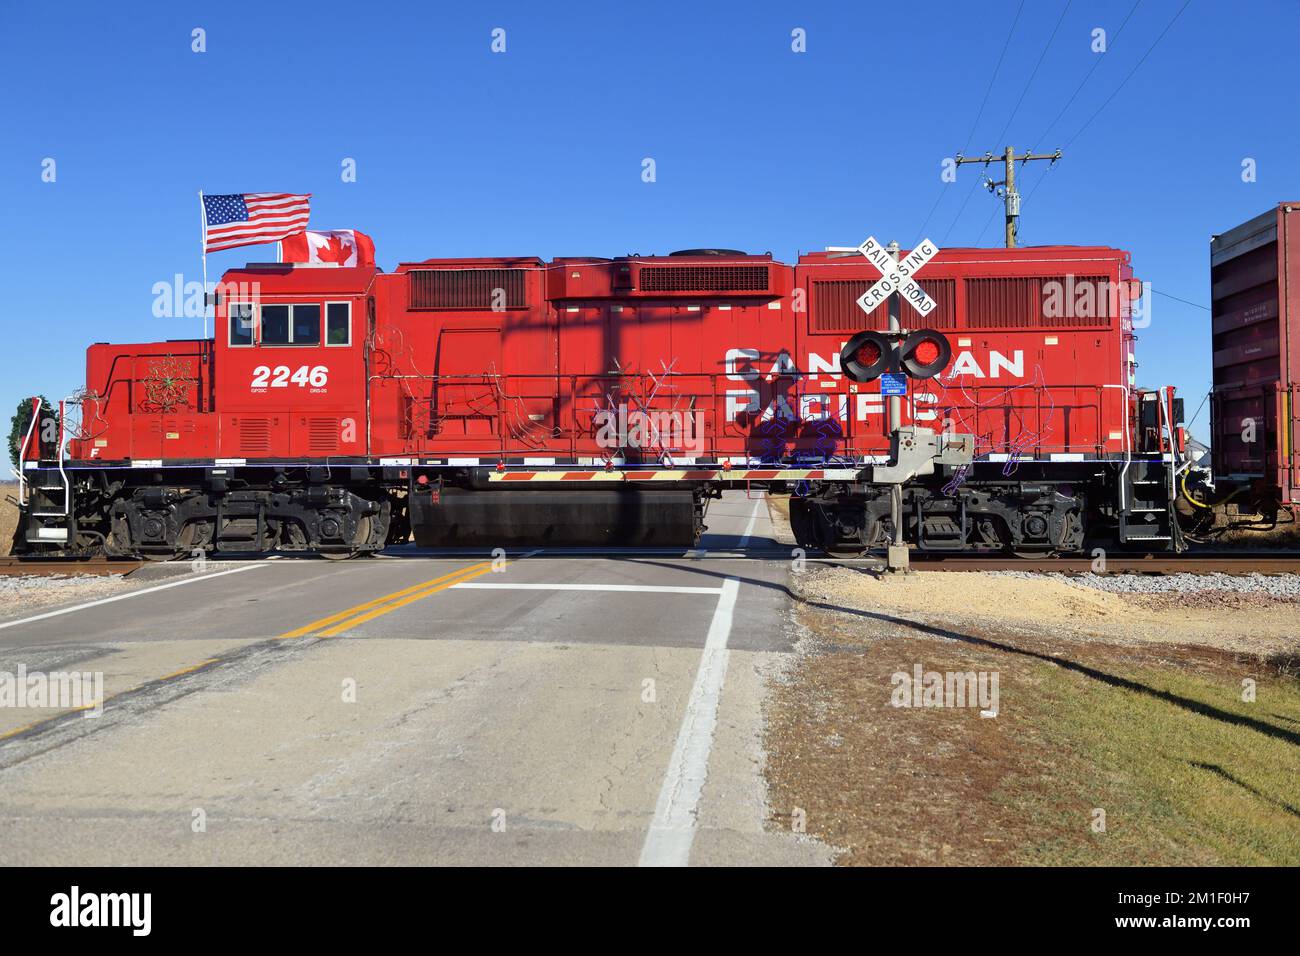 Hampshire, Illinois, USA. With flags unfurled on the lead locomotive, the Canadian Pacific Railway (CP) Holiday Train while moving between its schedul Stock Photo